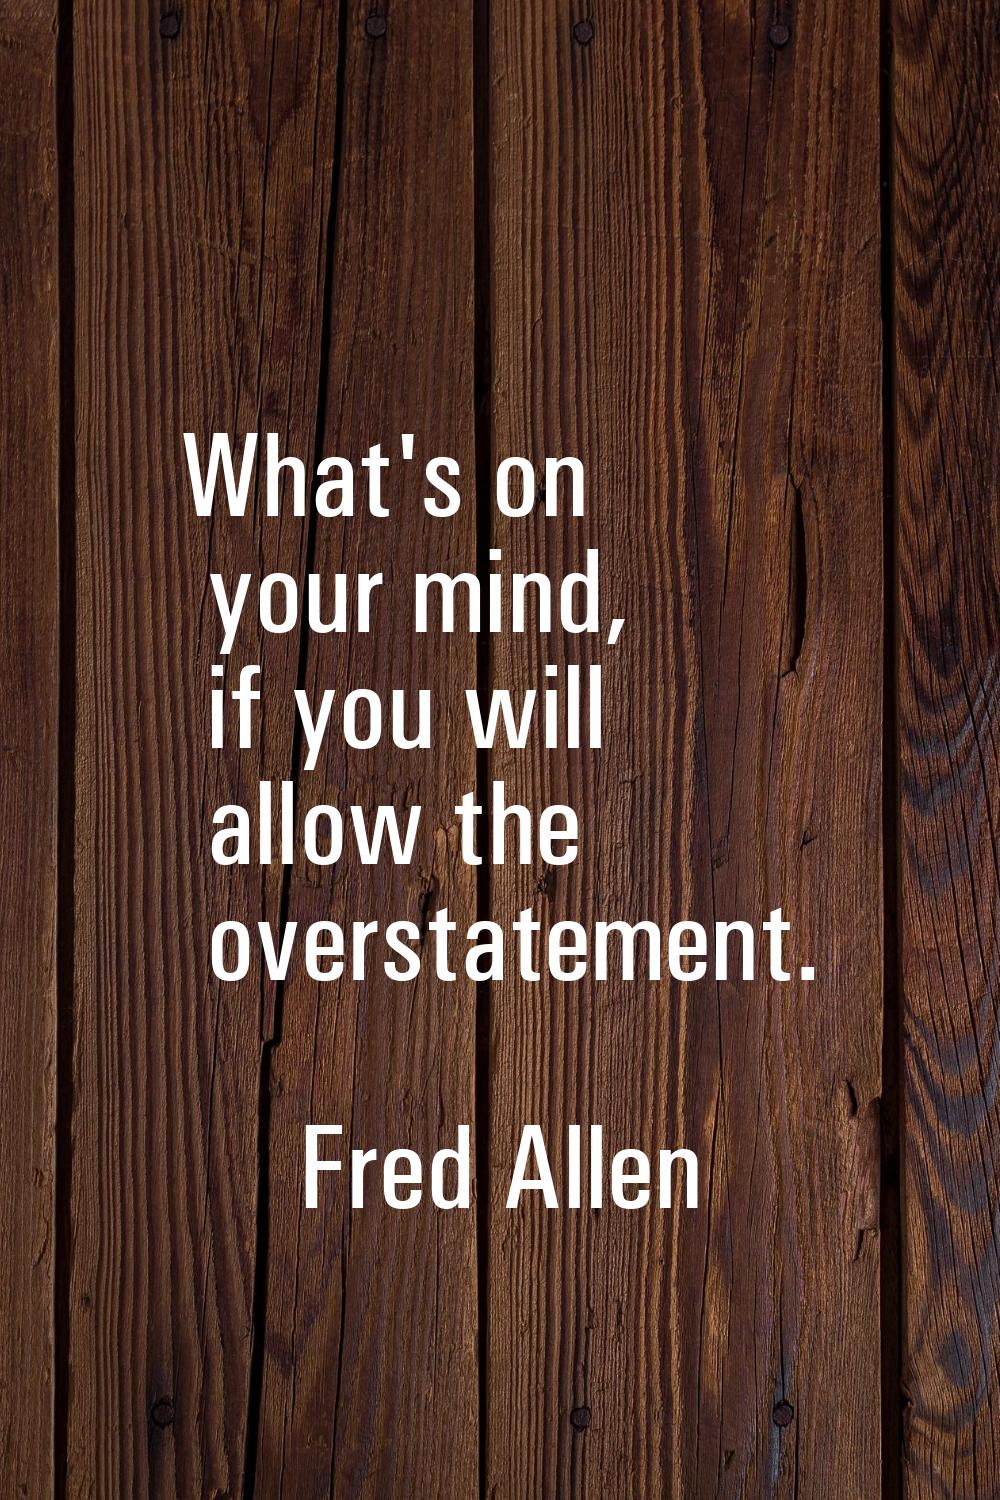 What's on your mind, if you will allow the overstatement.